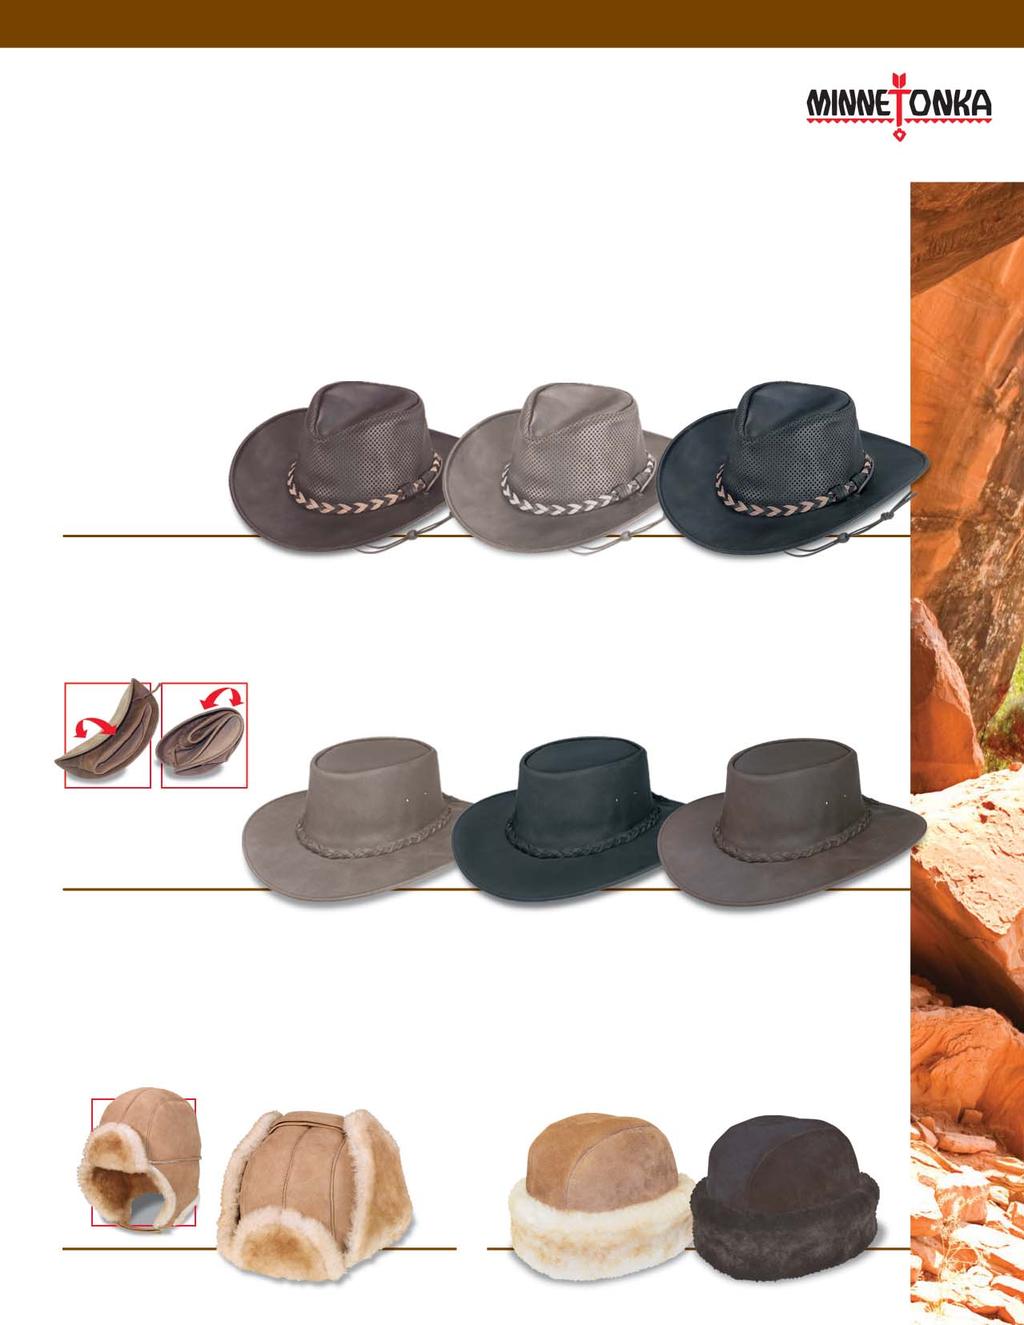 Minnetonka Hats All Styles In Stock For Immediate Delivery. Minnetonka style from head to toe, with unisex styling and our distinctive rugged leathers to make this headgear truly unique.